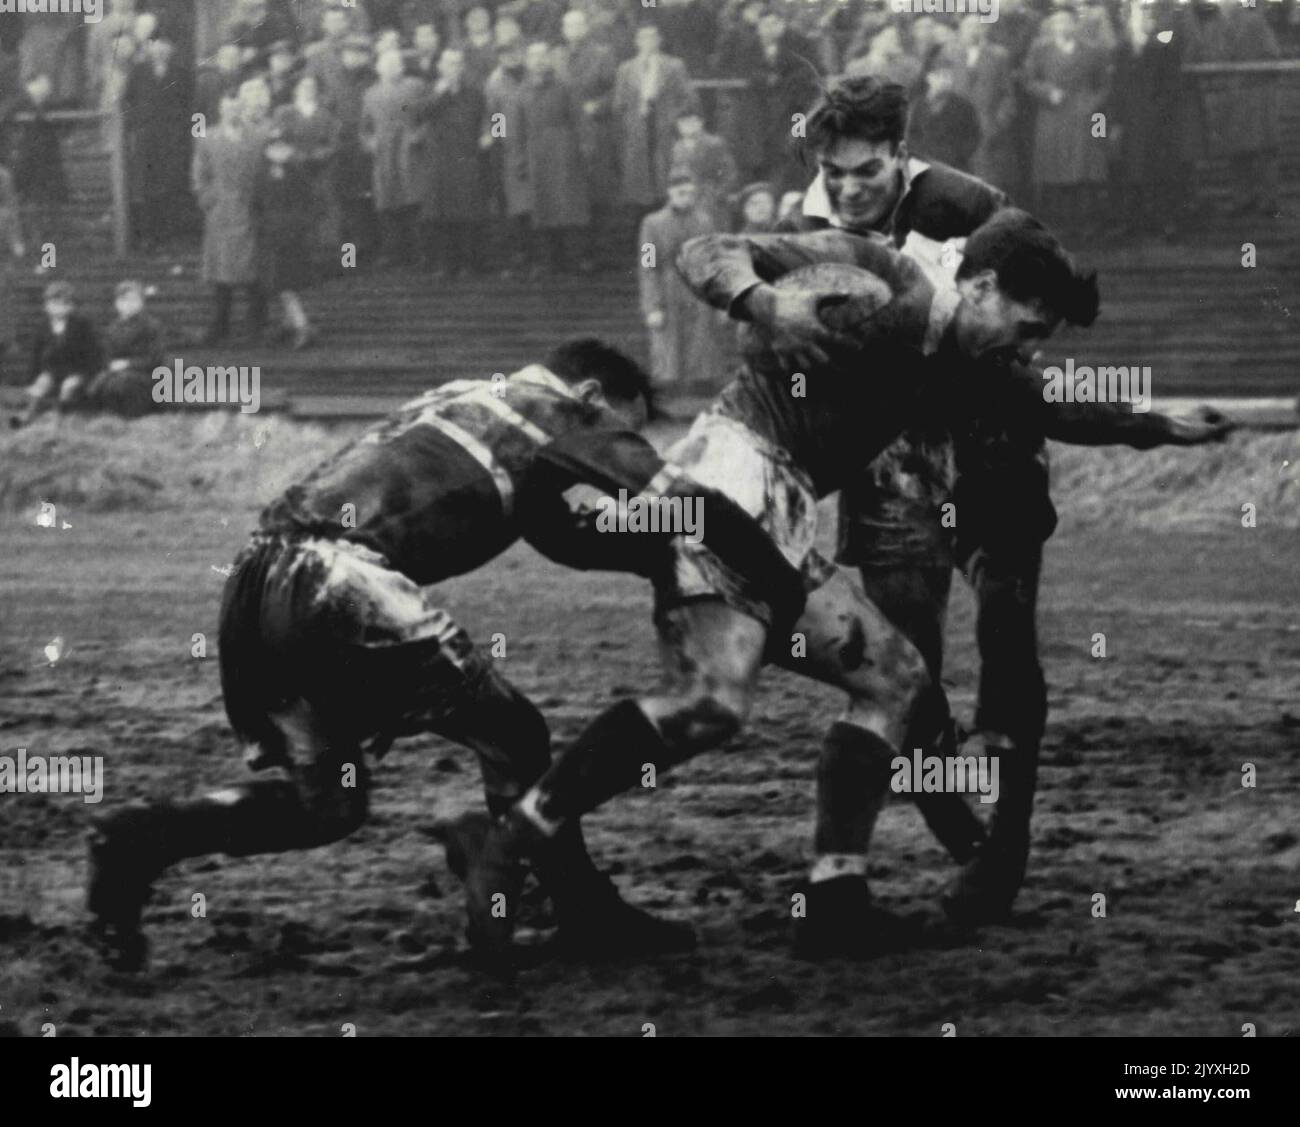 Swinton v Rochdale - Norburn of Swinton smiles as he tries to batter his way through a double tackle by. Harris and and Lord of Rochdale Hornets at Station Road, Ground, Swinton, today. February 27, 1954. Stock Photo